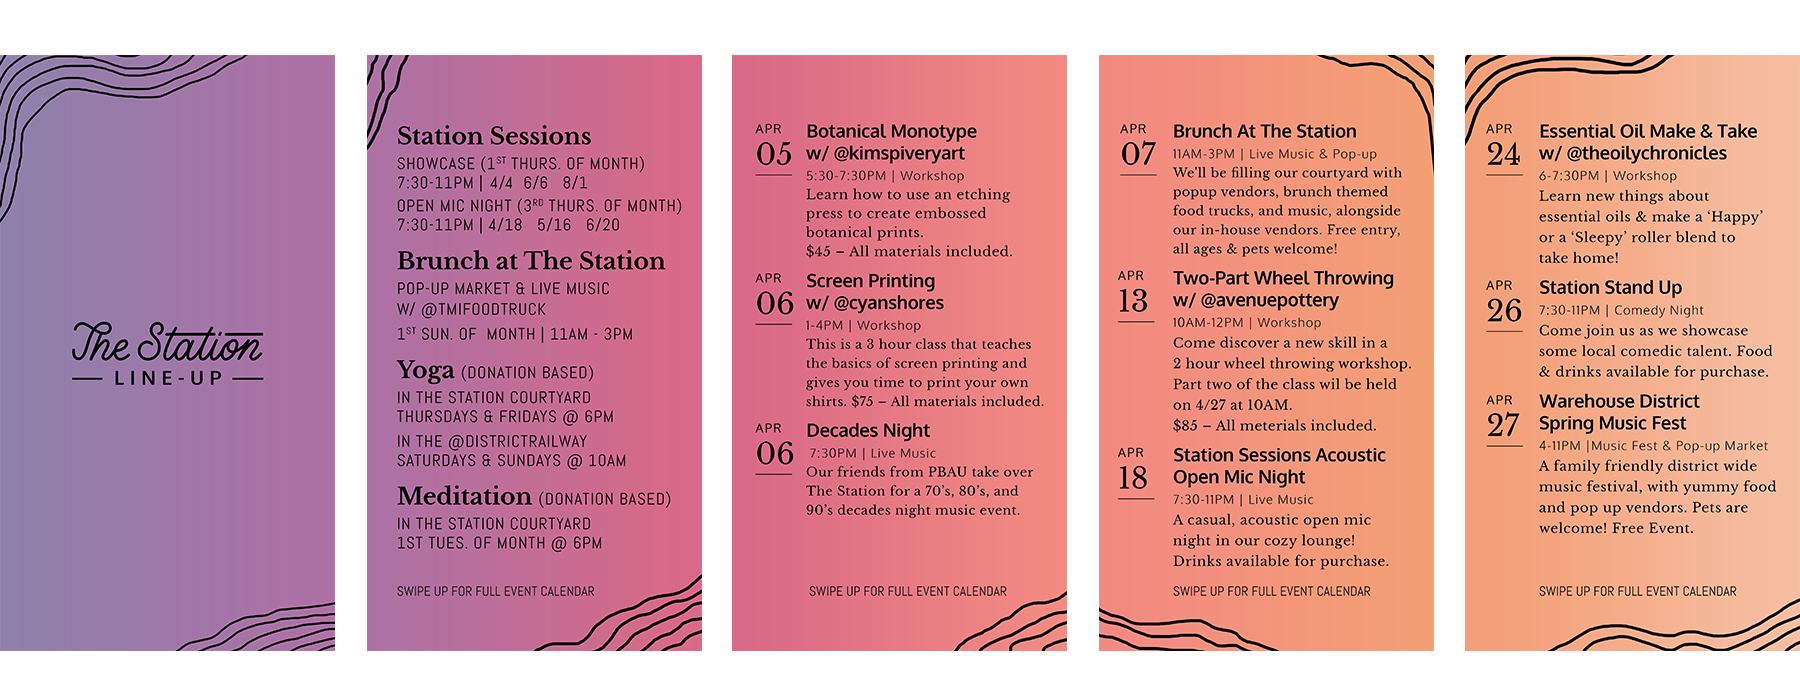 The Station Line-up designed for Instagram stories, showcasing different events happening throughout the month against a purple to peach gradient with abstract line work along the edges.